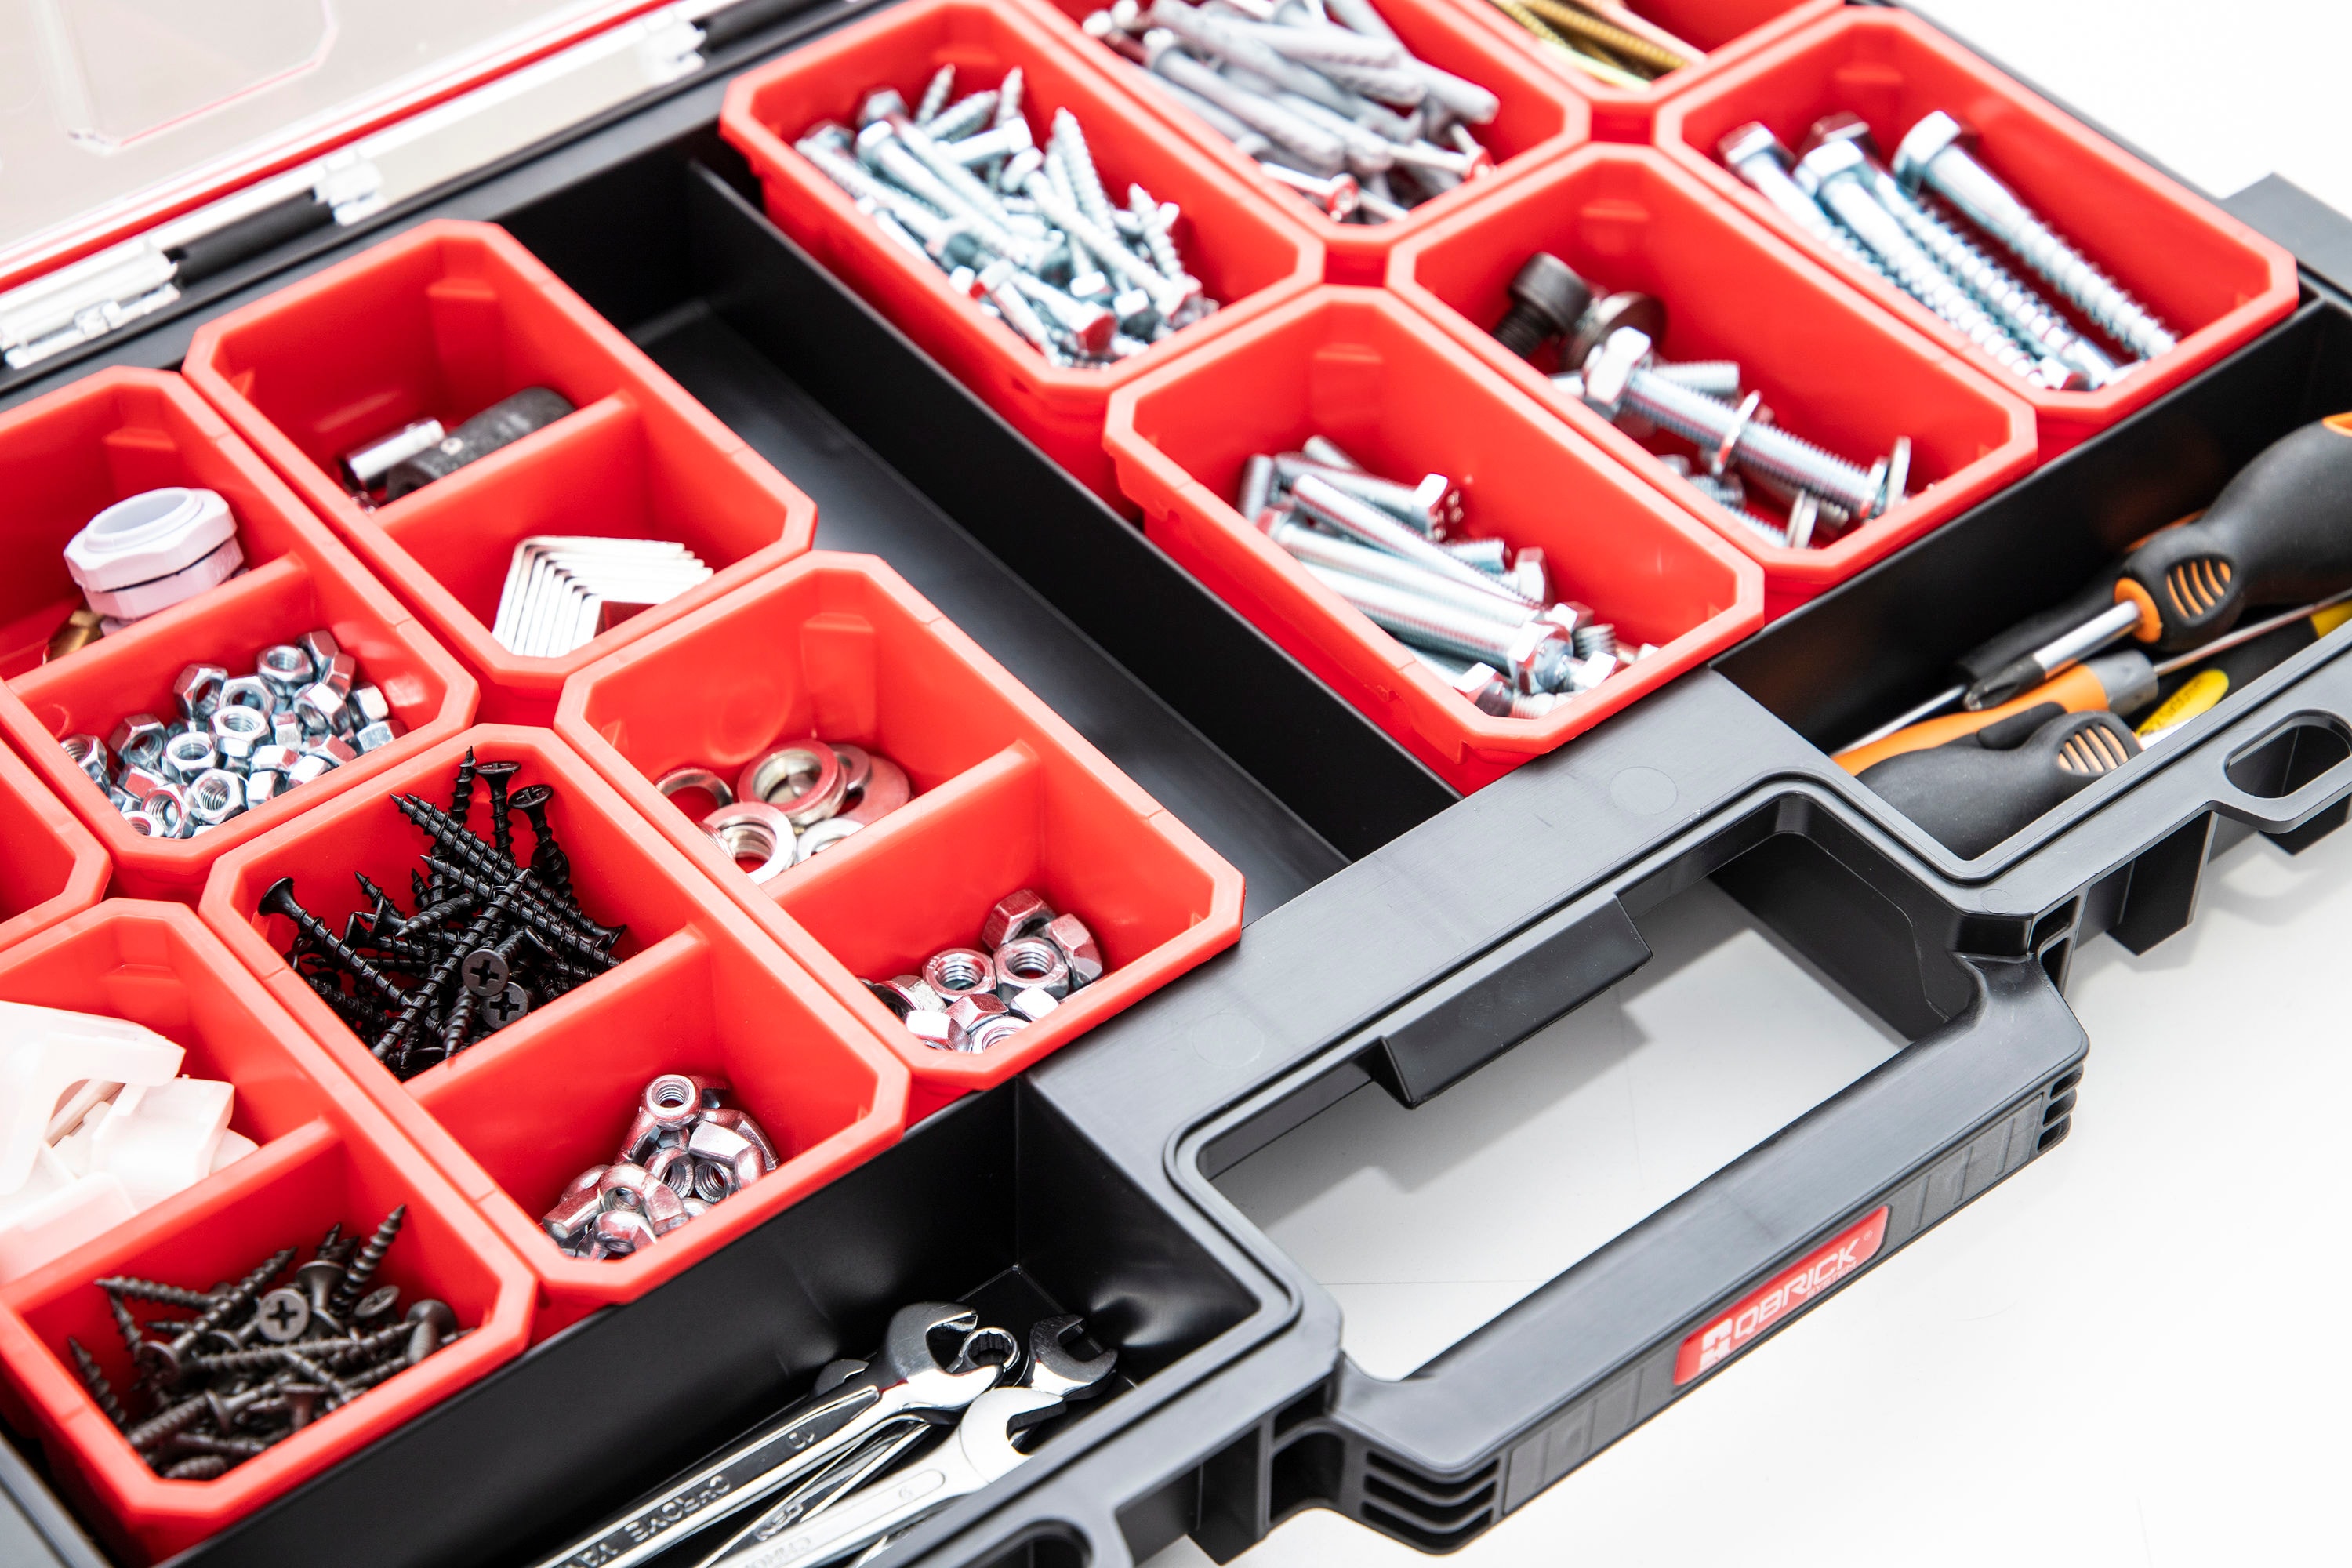 Qbrick System PRO Drawer 3 Toolbox 2.0 Basic - Electrical 4 Less